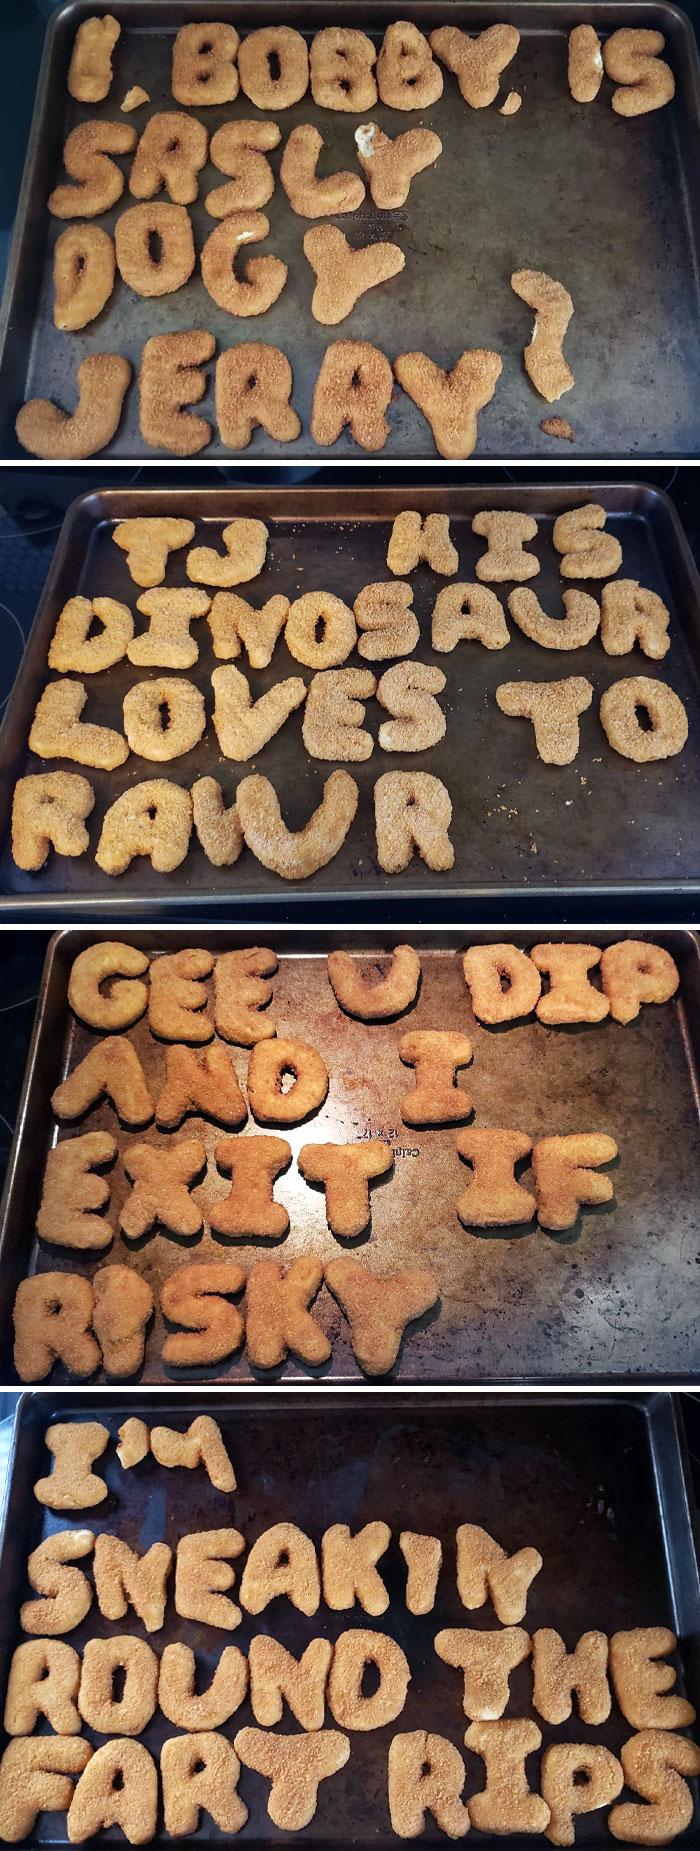 Every Time My Wife And I Eat Chicken Nuggets I Try To Spell Something With All The Letters To Make Her Giggle